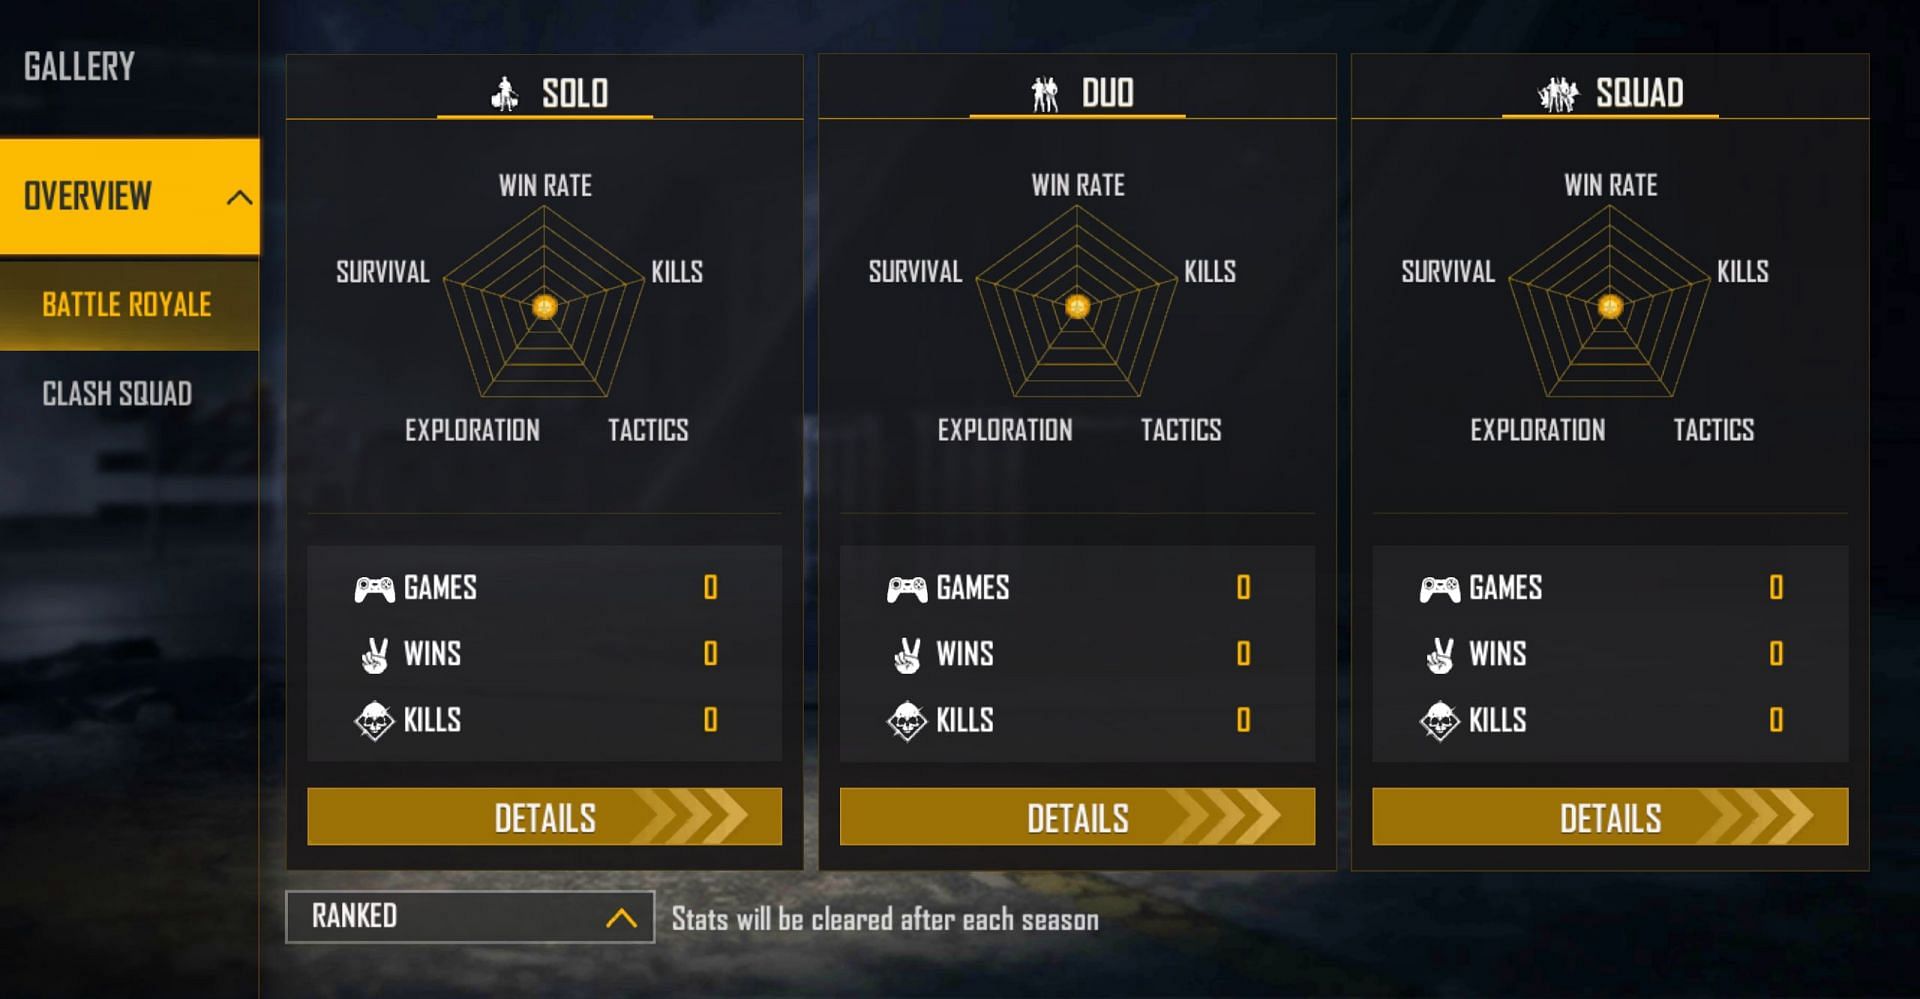 Sultan Proslo hasn&#039;t played any ranked matches as of now (Image via Free Fire)